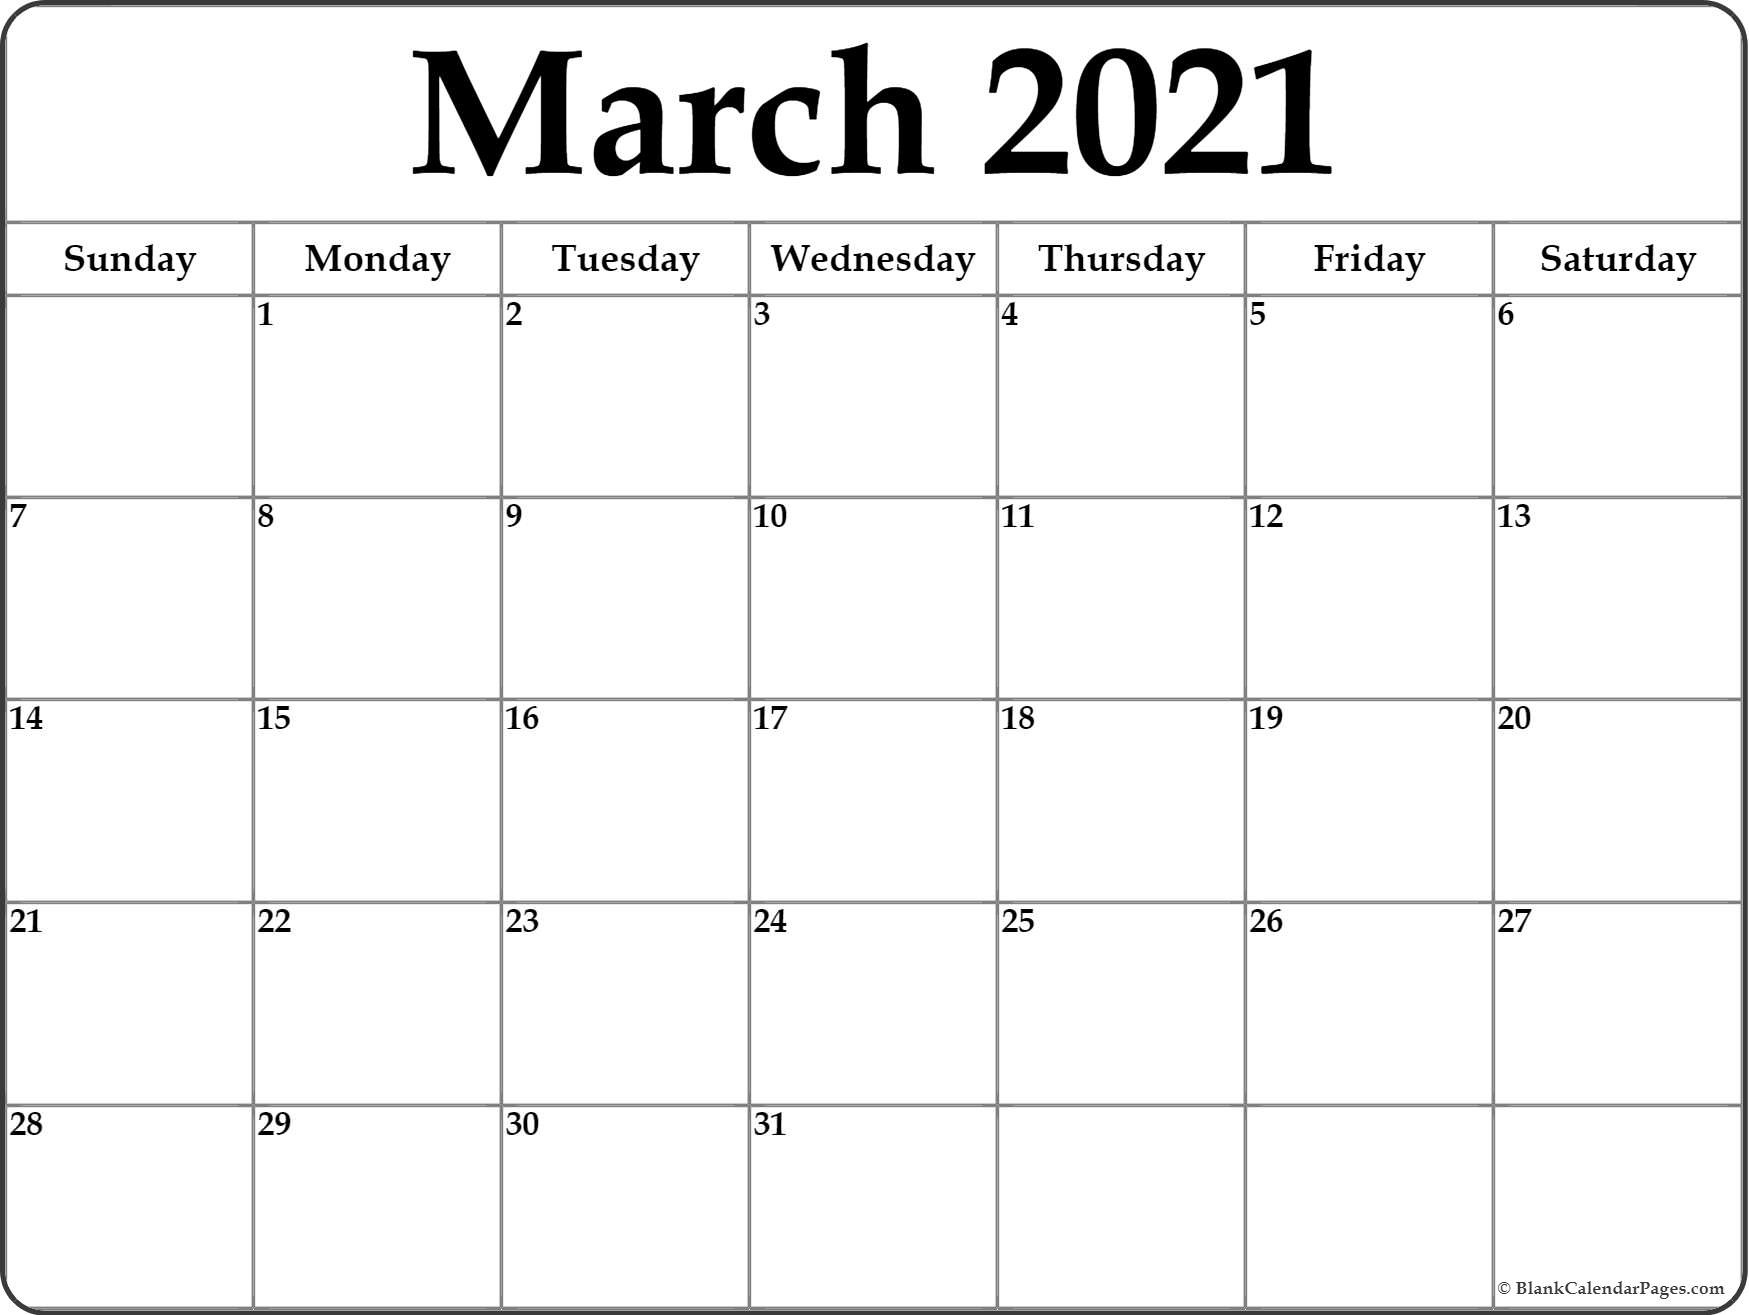 March 2021 Calendar | Free Printable Monthly Calendars-Blank Calendar Pages March 2021